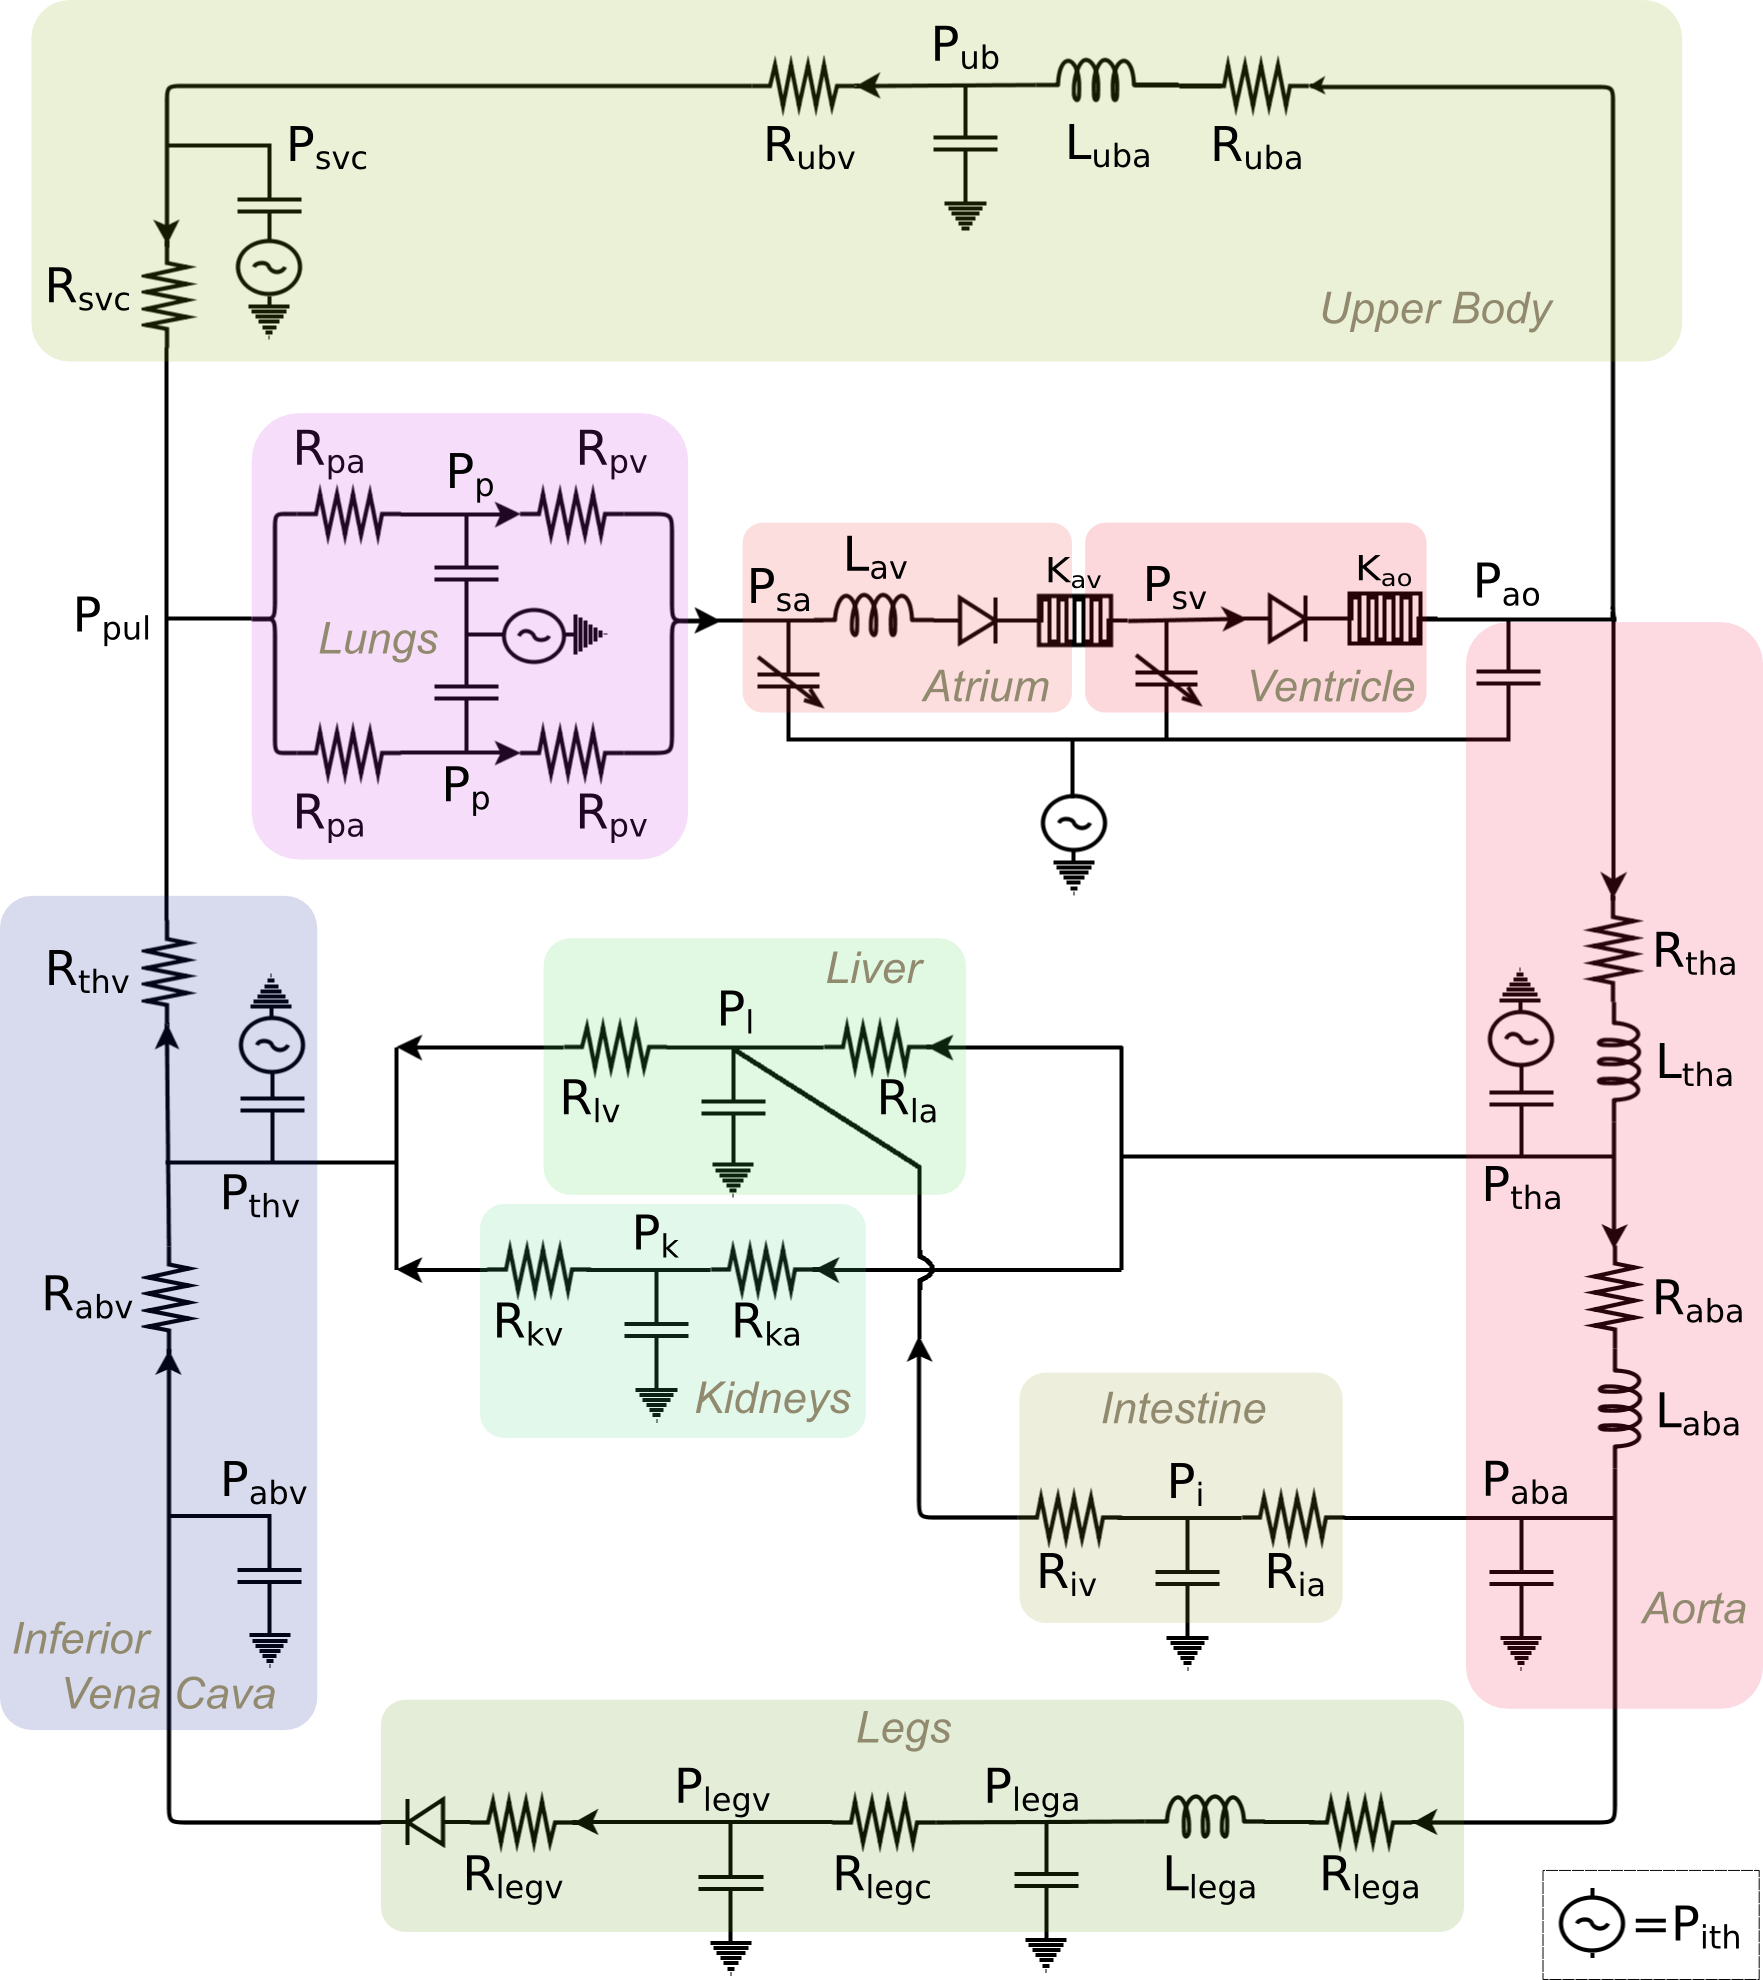 Lumped-parameter circuit physiology model describing the single-ventricle circulation